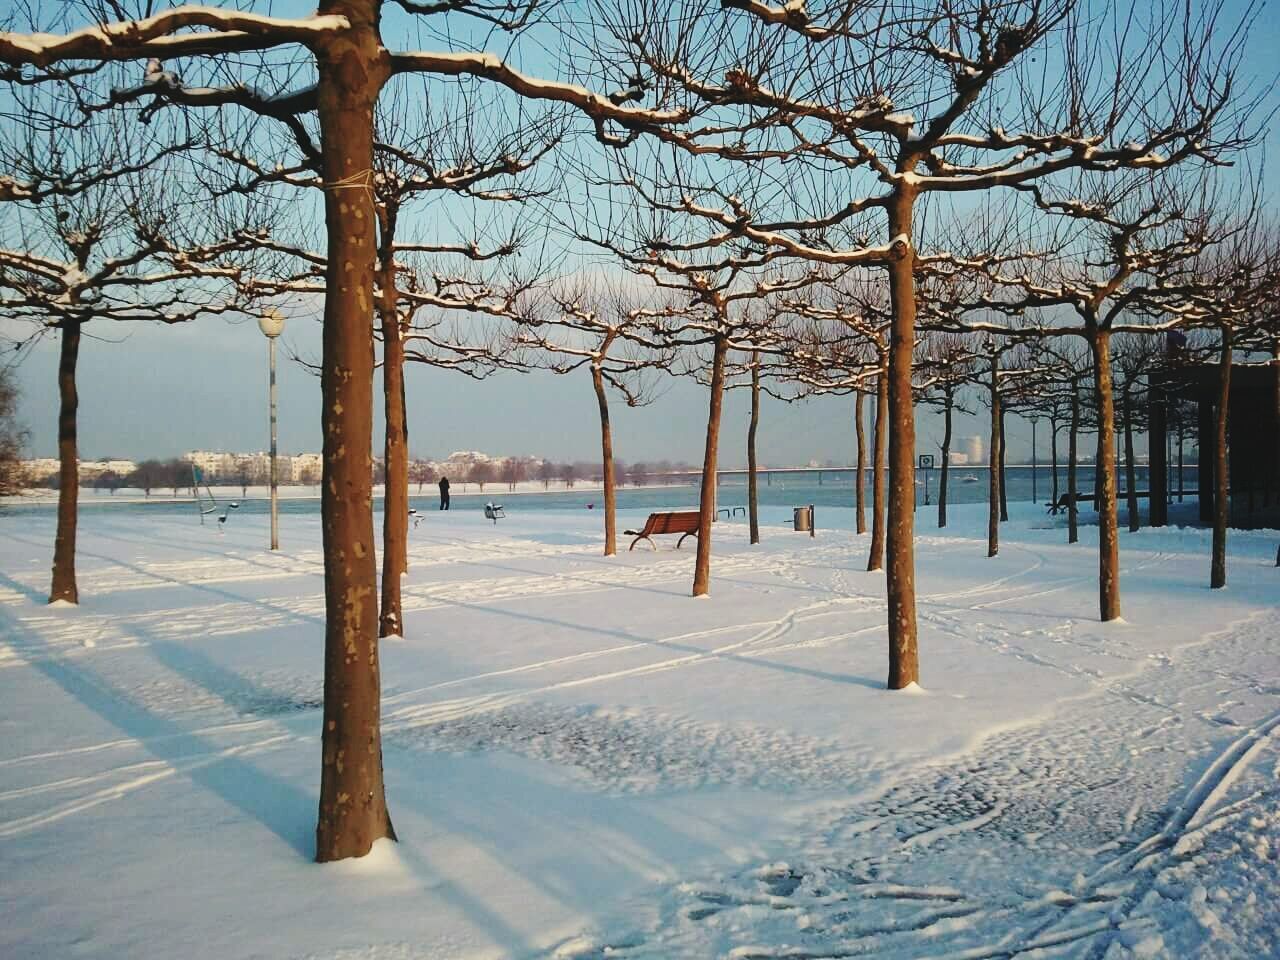 View of bare trees on snow by river